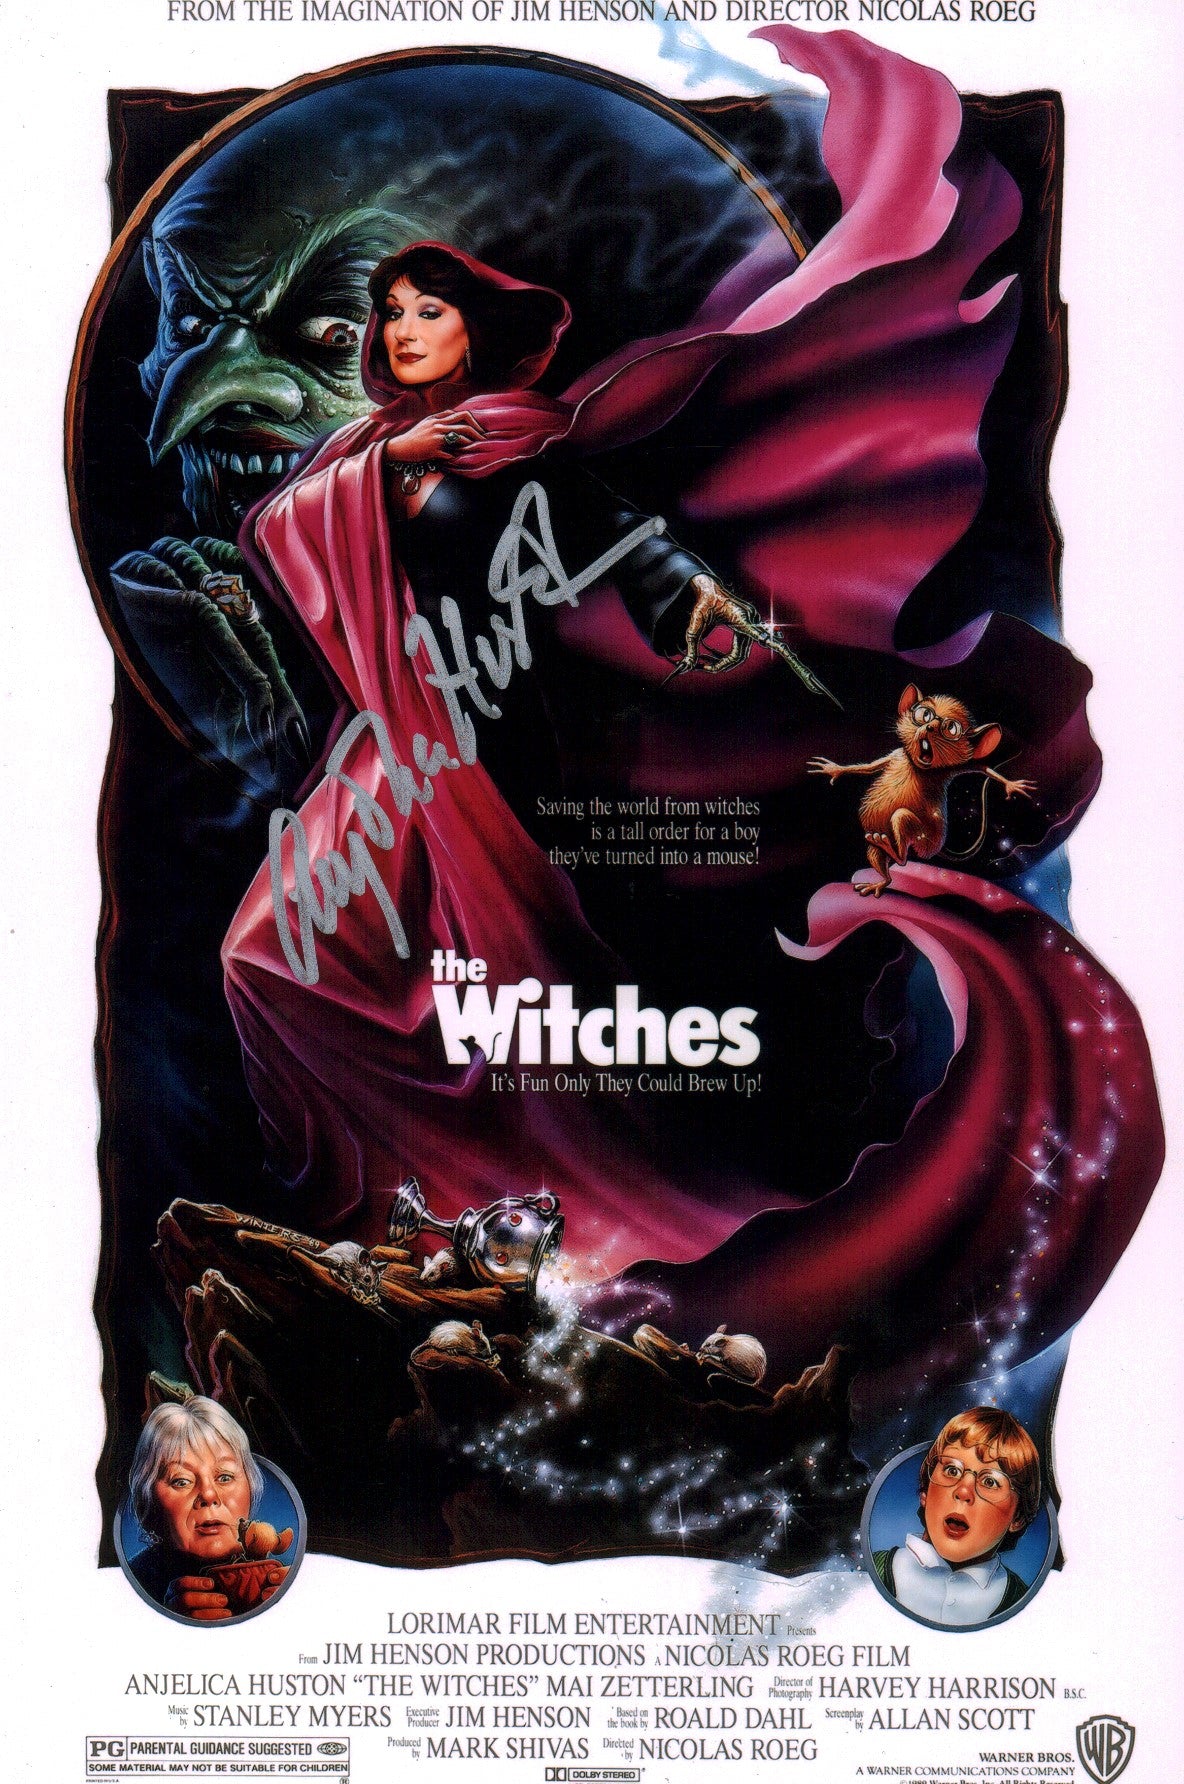 Anjelica Huston The Witches 8x12 Signed Photo JSA Certified Autograph